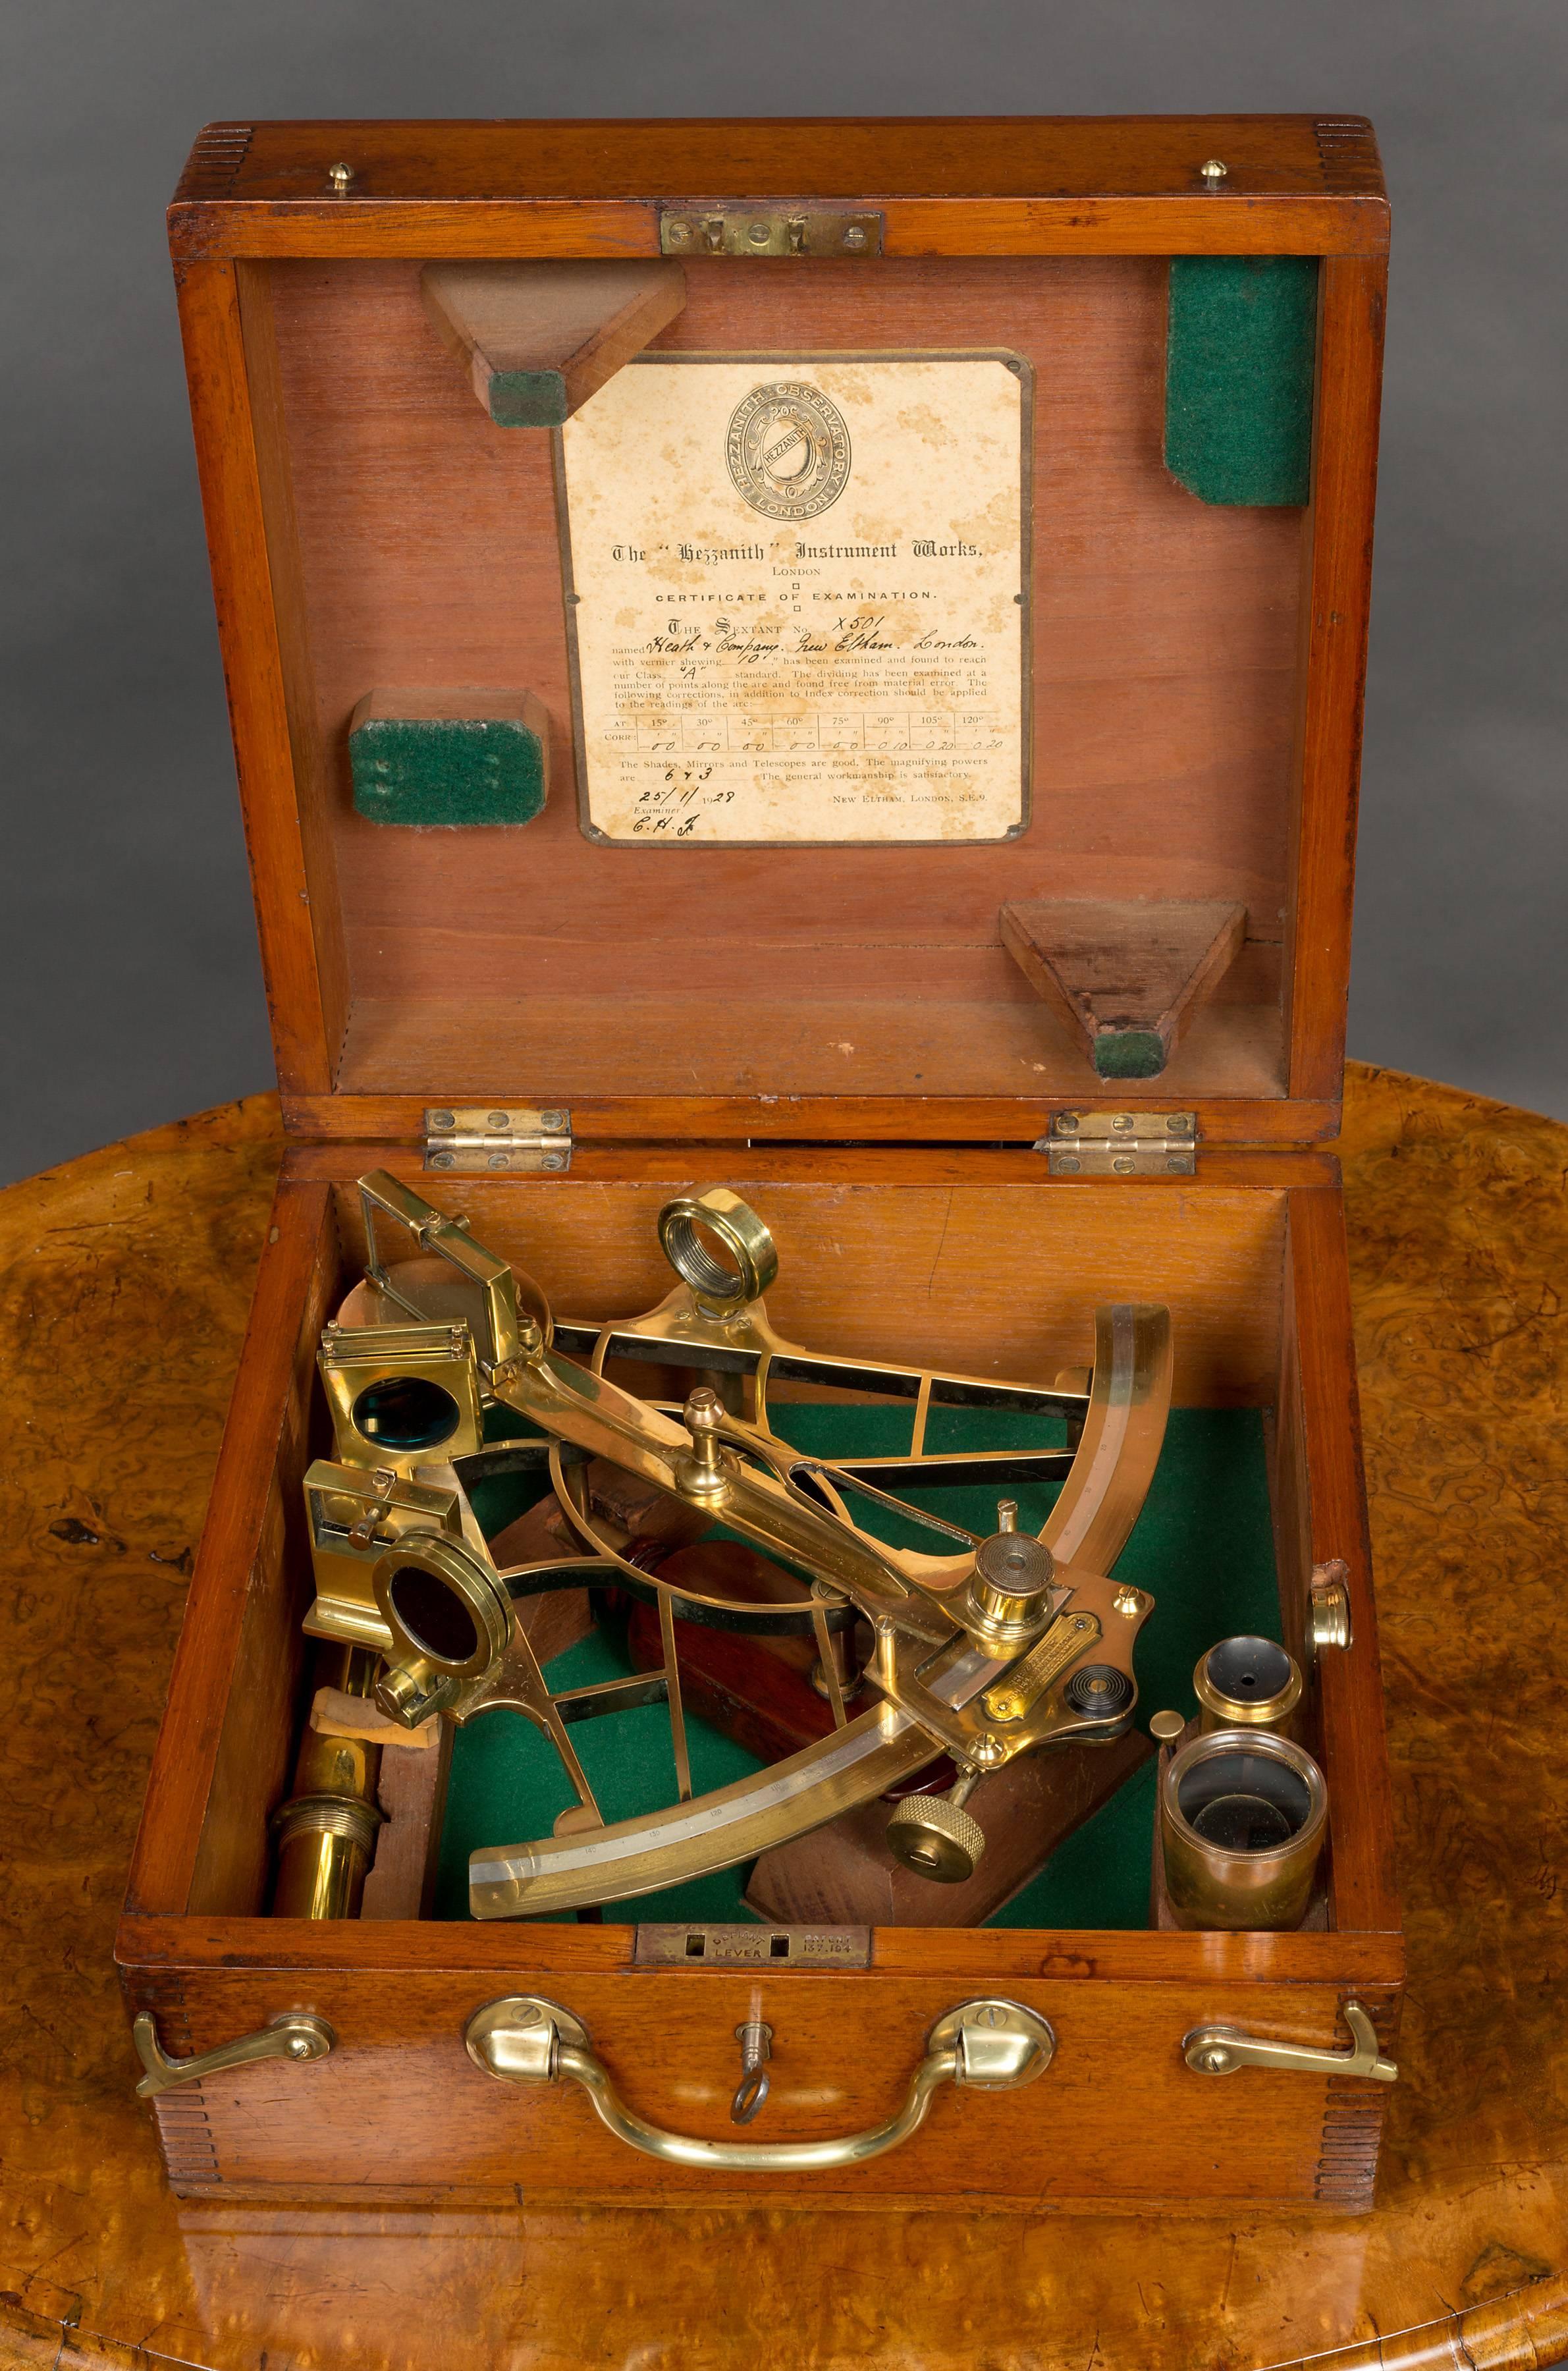 Fine 9 inch radius vernier sextant by Heath and Company. Laquered brass frame with silvered arc signed ‘Heath and Company, New Eltham, London, No.X501. The scale marked from 0 degrees to 140 degrees with swivel magnifier, adjustable tube socket,